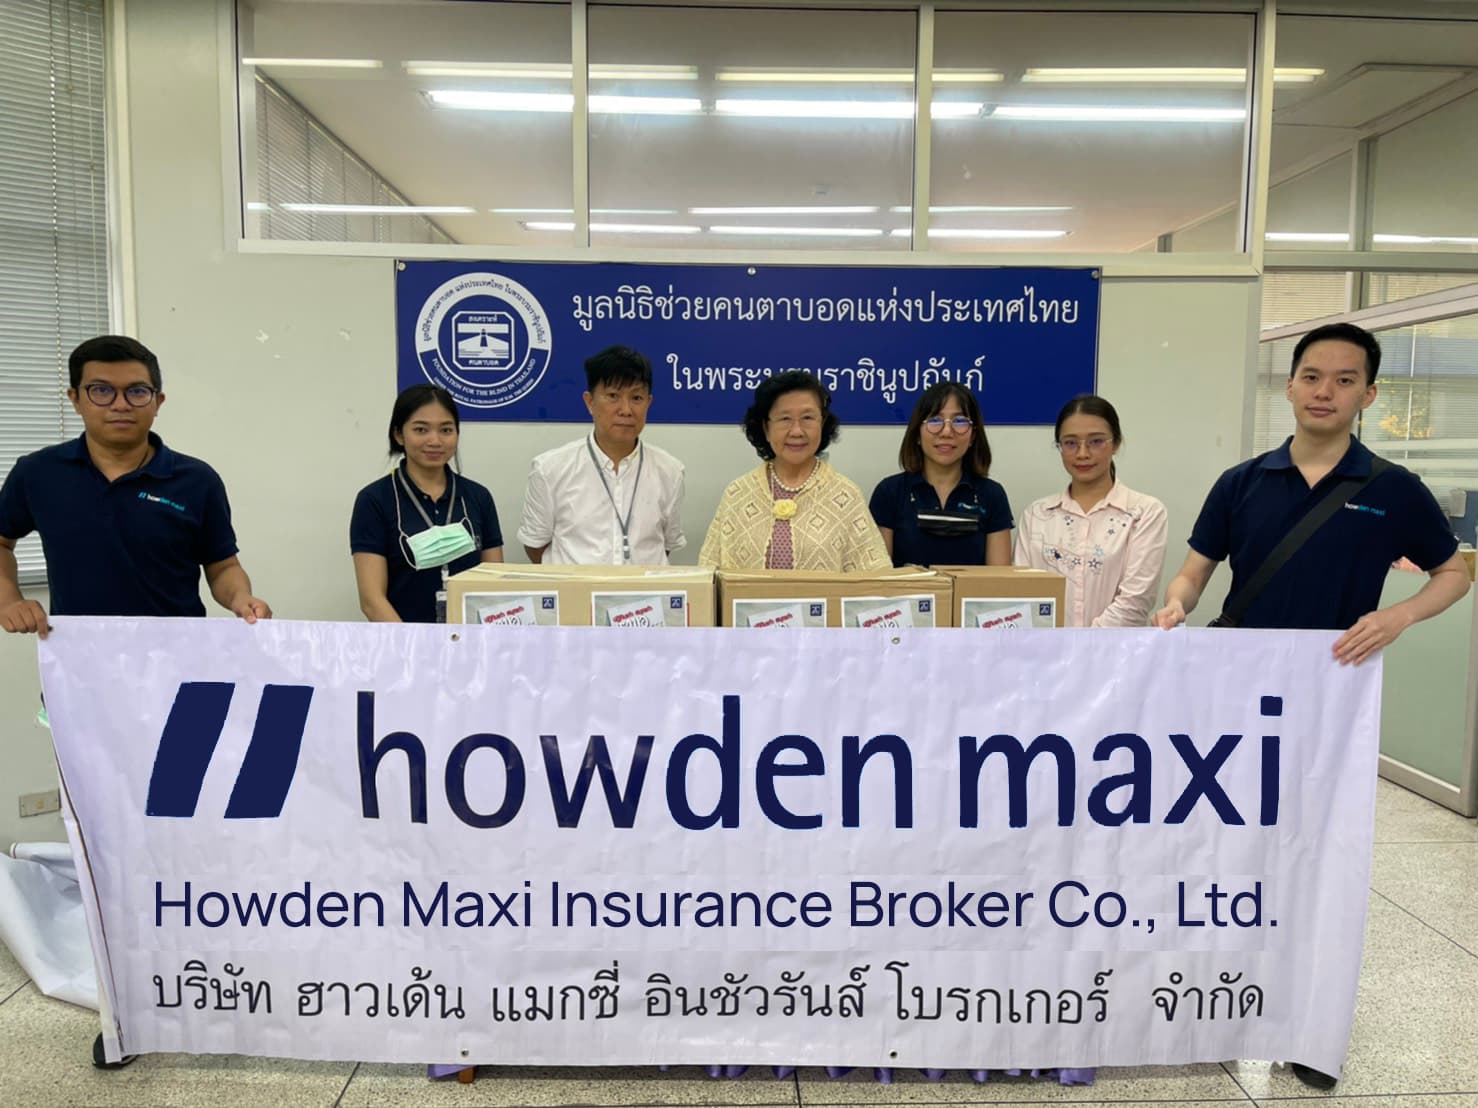 HOWDEN MAXI donated calendars to Foundation